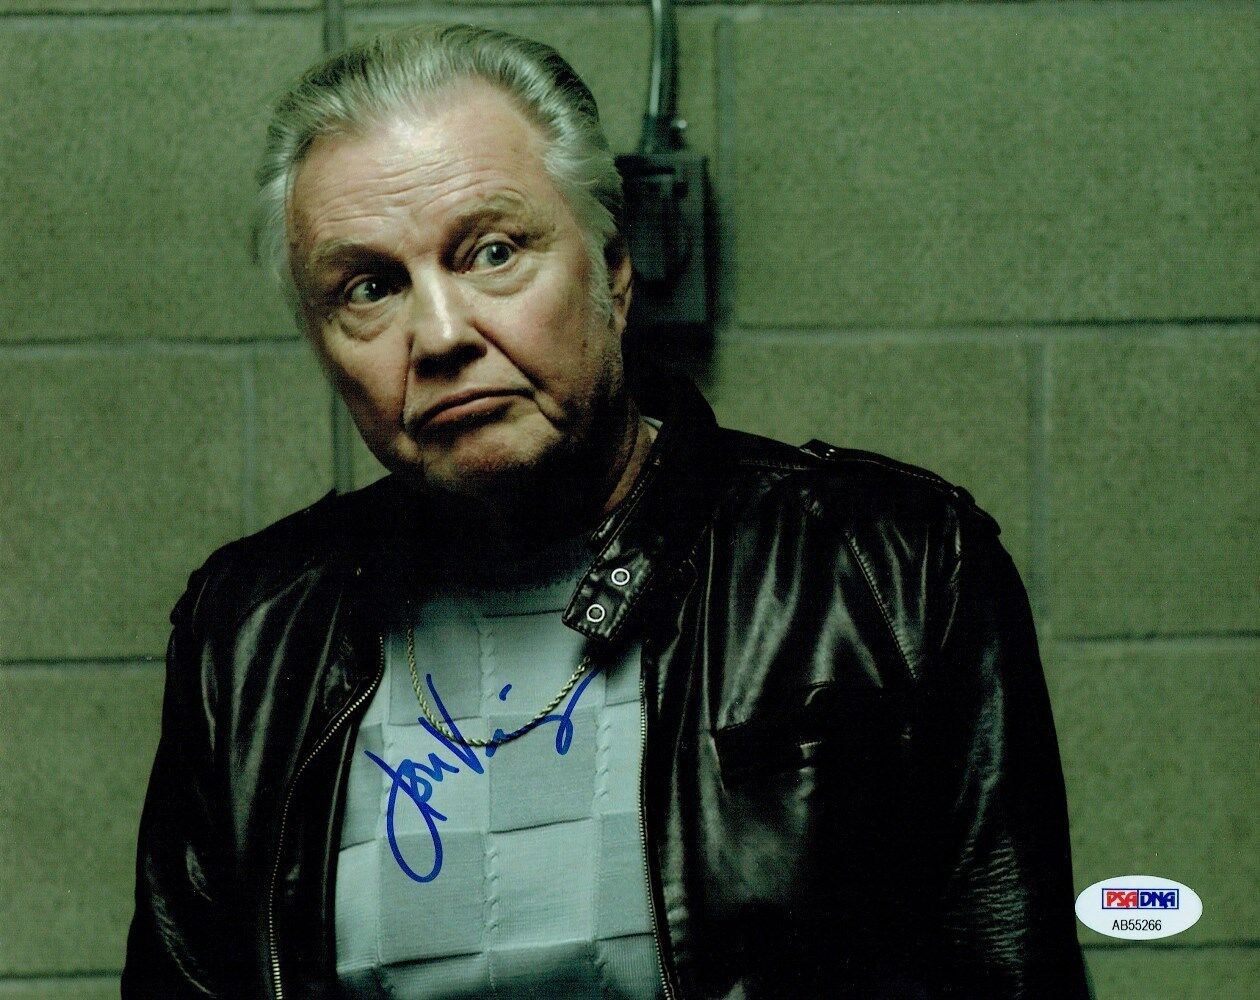 Jon Voight Signed Ray Donovan Authentic Autographed 8x10 Photo Poster painting PSA/DNA #AB55266